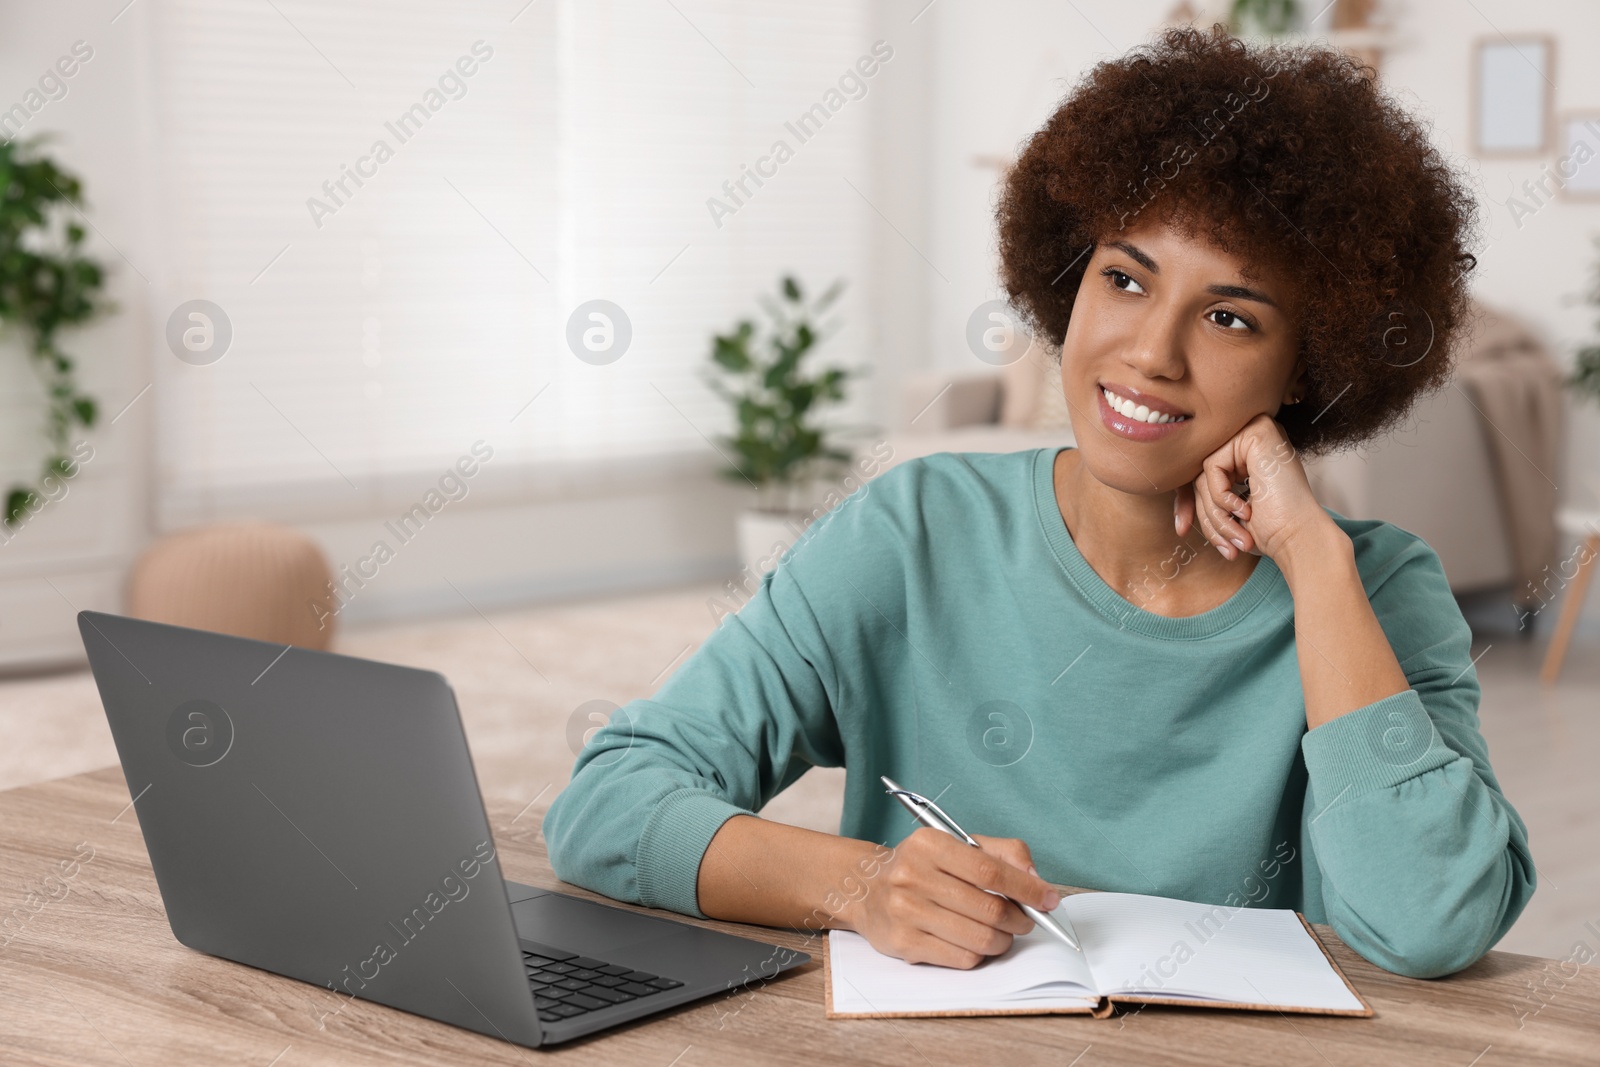 Photo of Young woman using laptop and writing in notebook at wooden desk in room